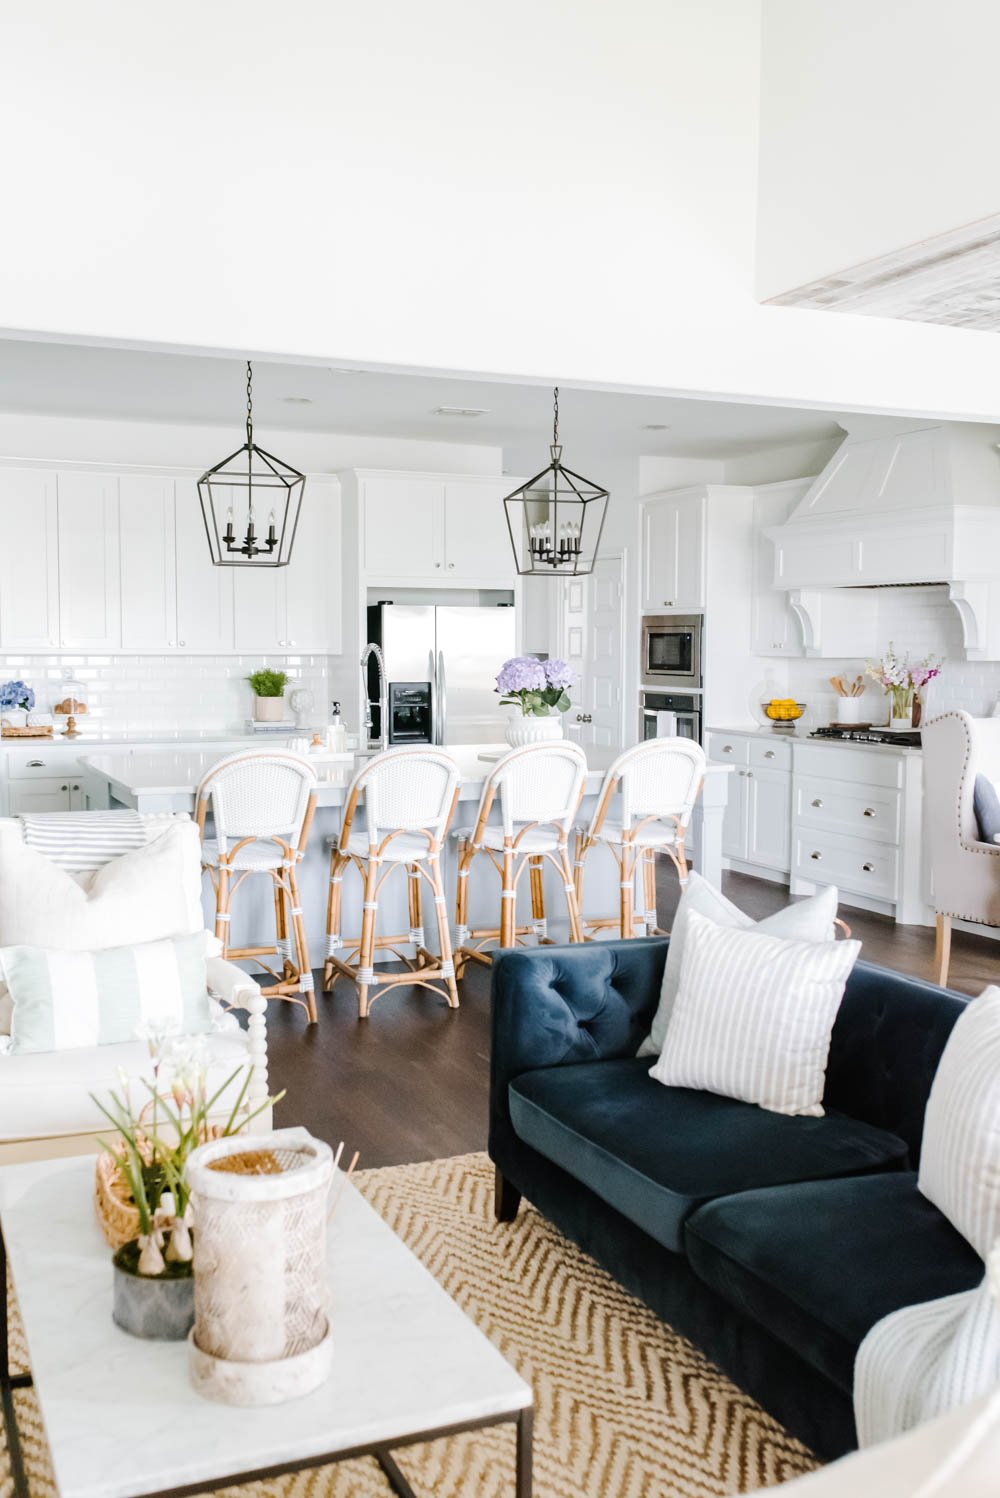 Bring summer décor into your kitchen with these fresh and simple summer kitchen decorating ideas. #ABlissfulNest #summerhomedecor #summerstyle